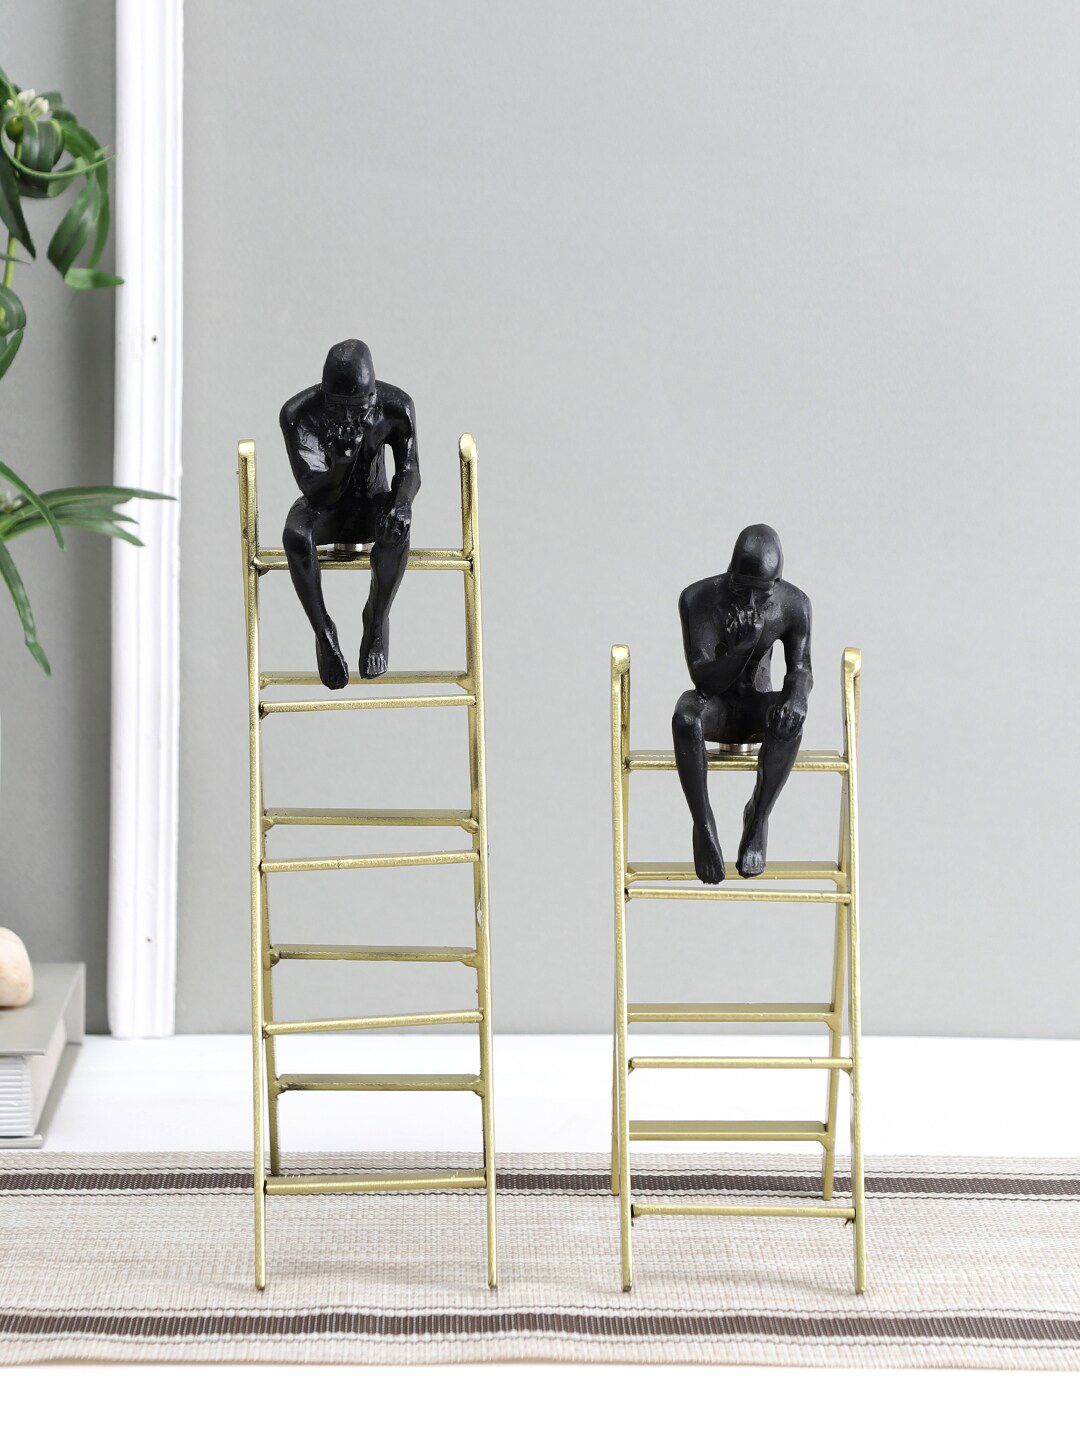 Aapno Rajasthan Set Of 2 Gold-Toned & Black Simple Ladder Showpieces Price in India